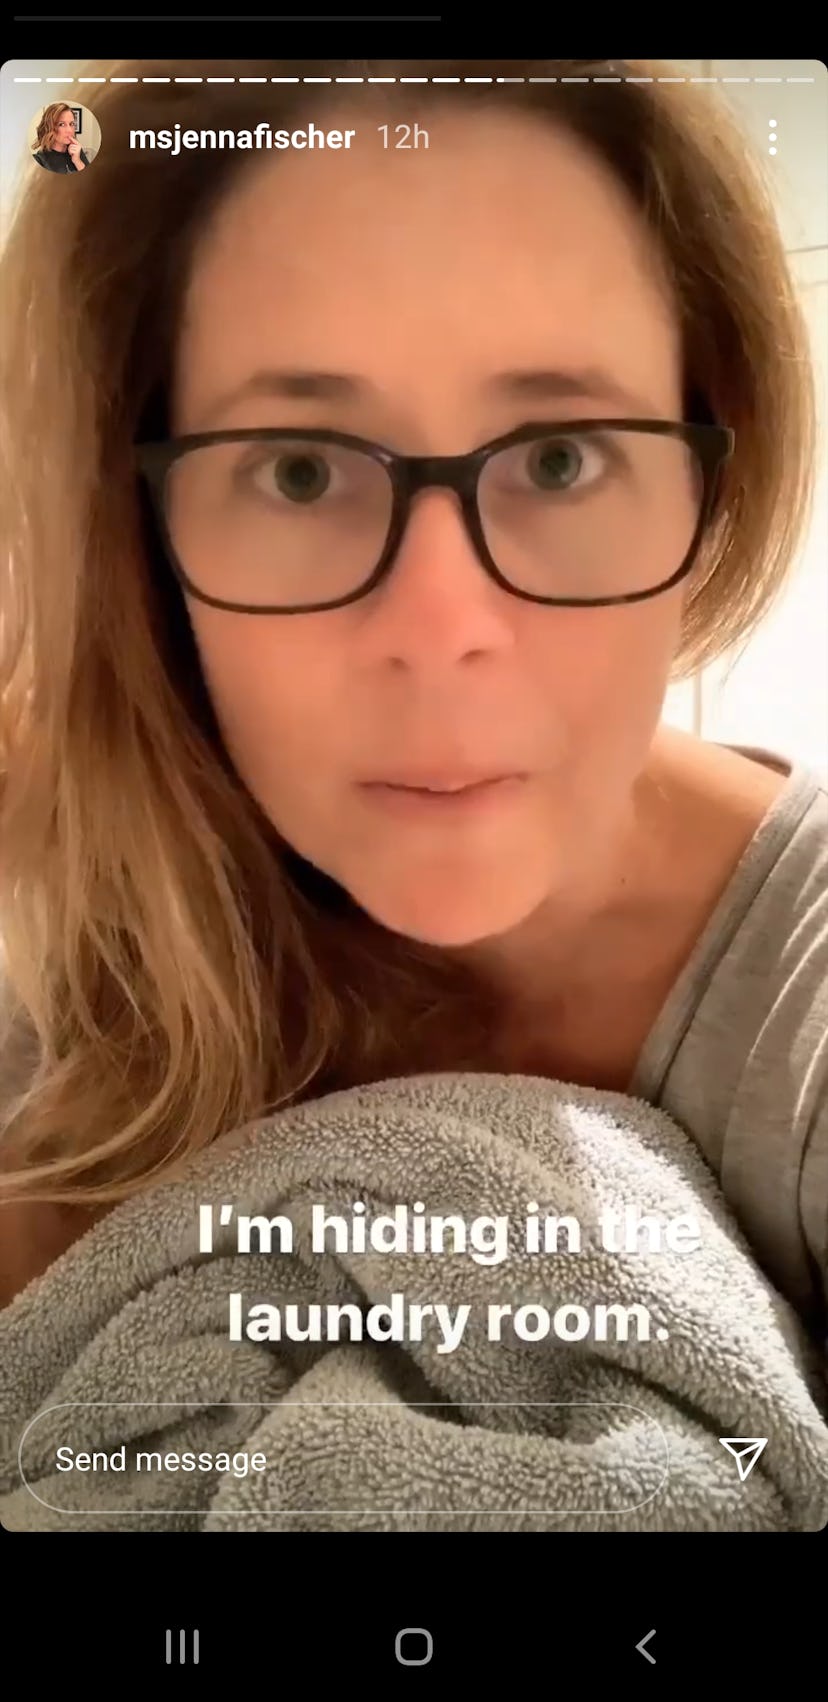 Jenna Fischer hid in her laundry room to deal with upcoming back to school stress.